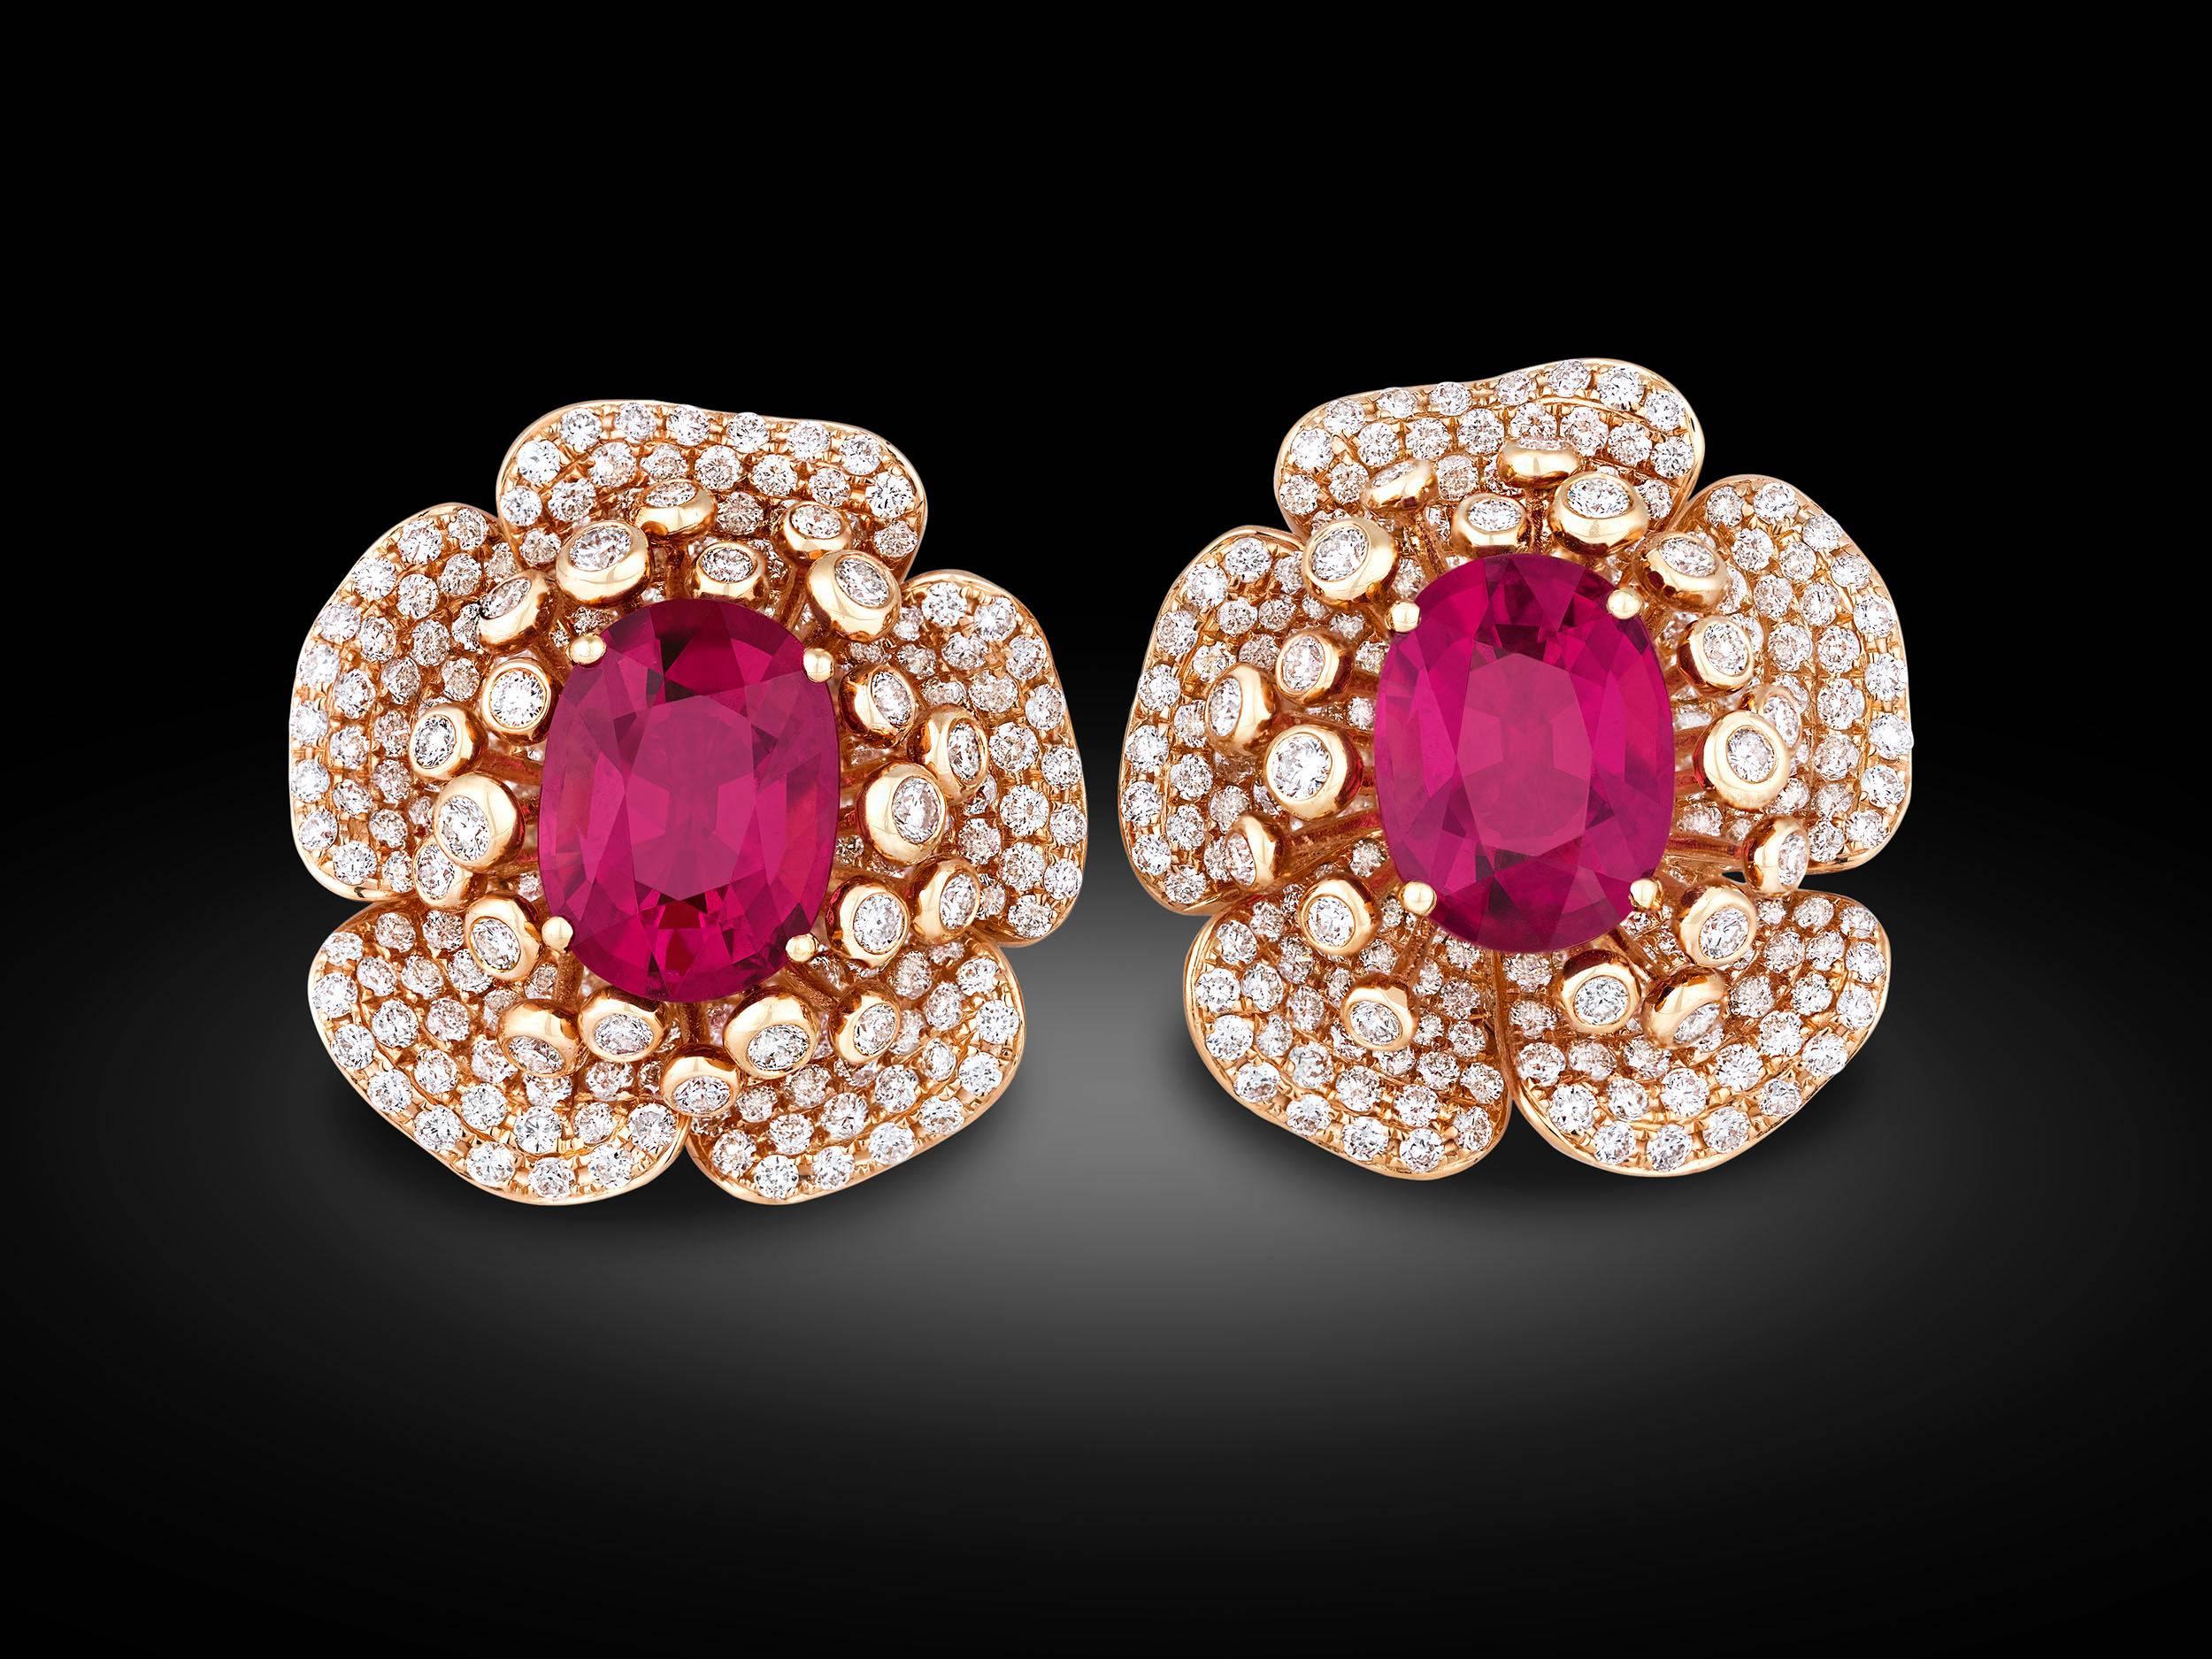 Shimmering gemstones are in full bloom in this sensational pair of rubellite and diamond earrings. Two rubellite tourmalines totaling 9.87 carats rest at the center of the blooms, exhibiting the rich crimson hue that makes these gemstones so